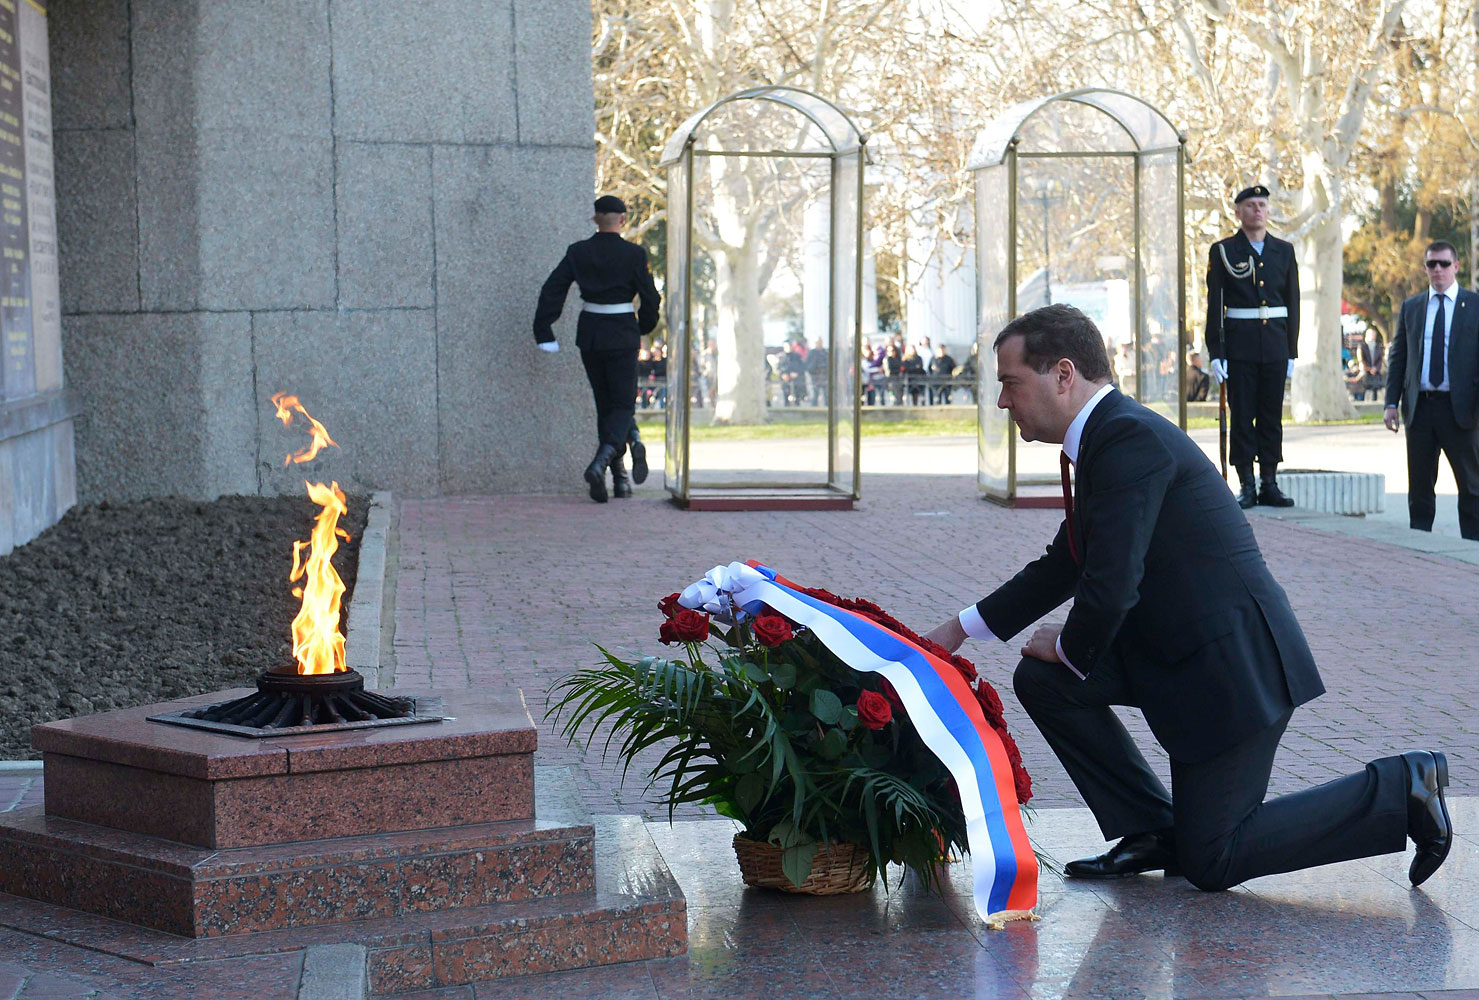 Russia's Prime Minister Dmitry Medvedev takes part in a wreath laying ceremony at the World War Two Memorial to Heroic Defence of Sevastopol in Sevastopol, March 31, 2014. (Alexander Astafyev—RIA Novosti/Reuters)